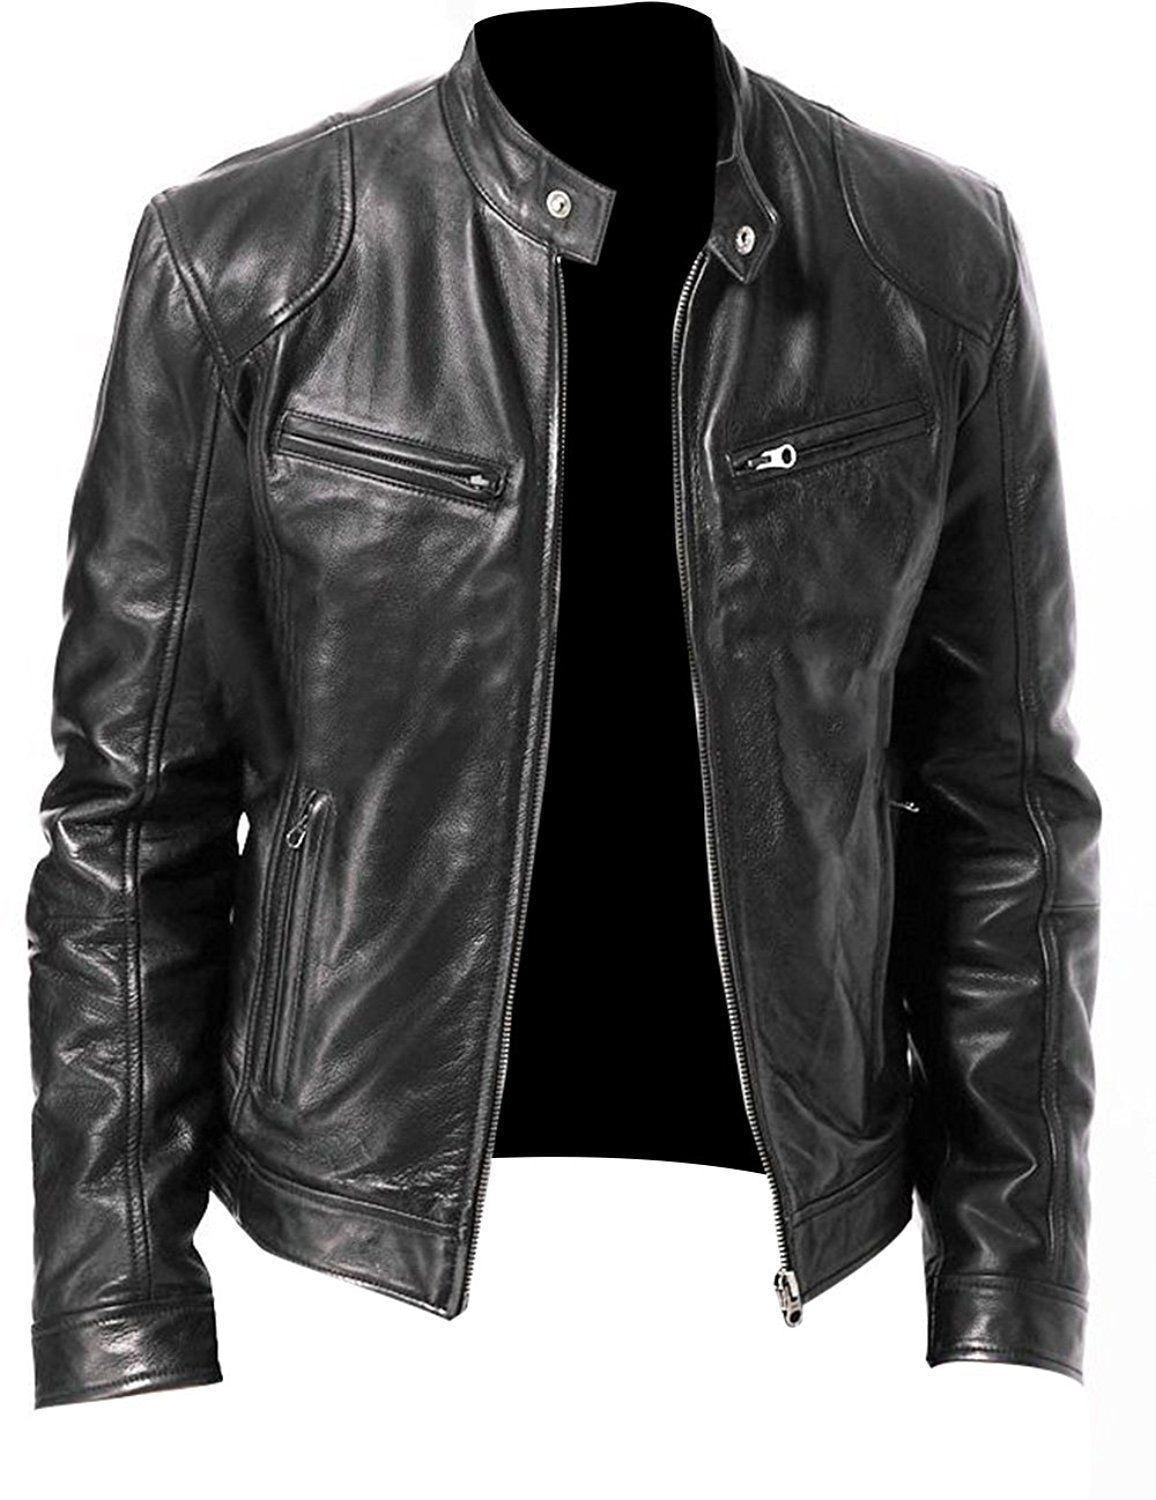 FF0001 Men Leather Jacket Plus Size Black Brown Mens Stand Collar Coats Leather Biker Jackets  Motorcycle Leather Jacket